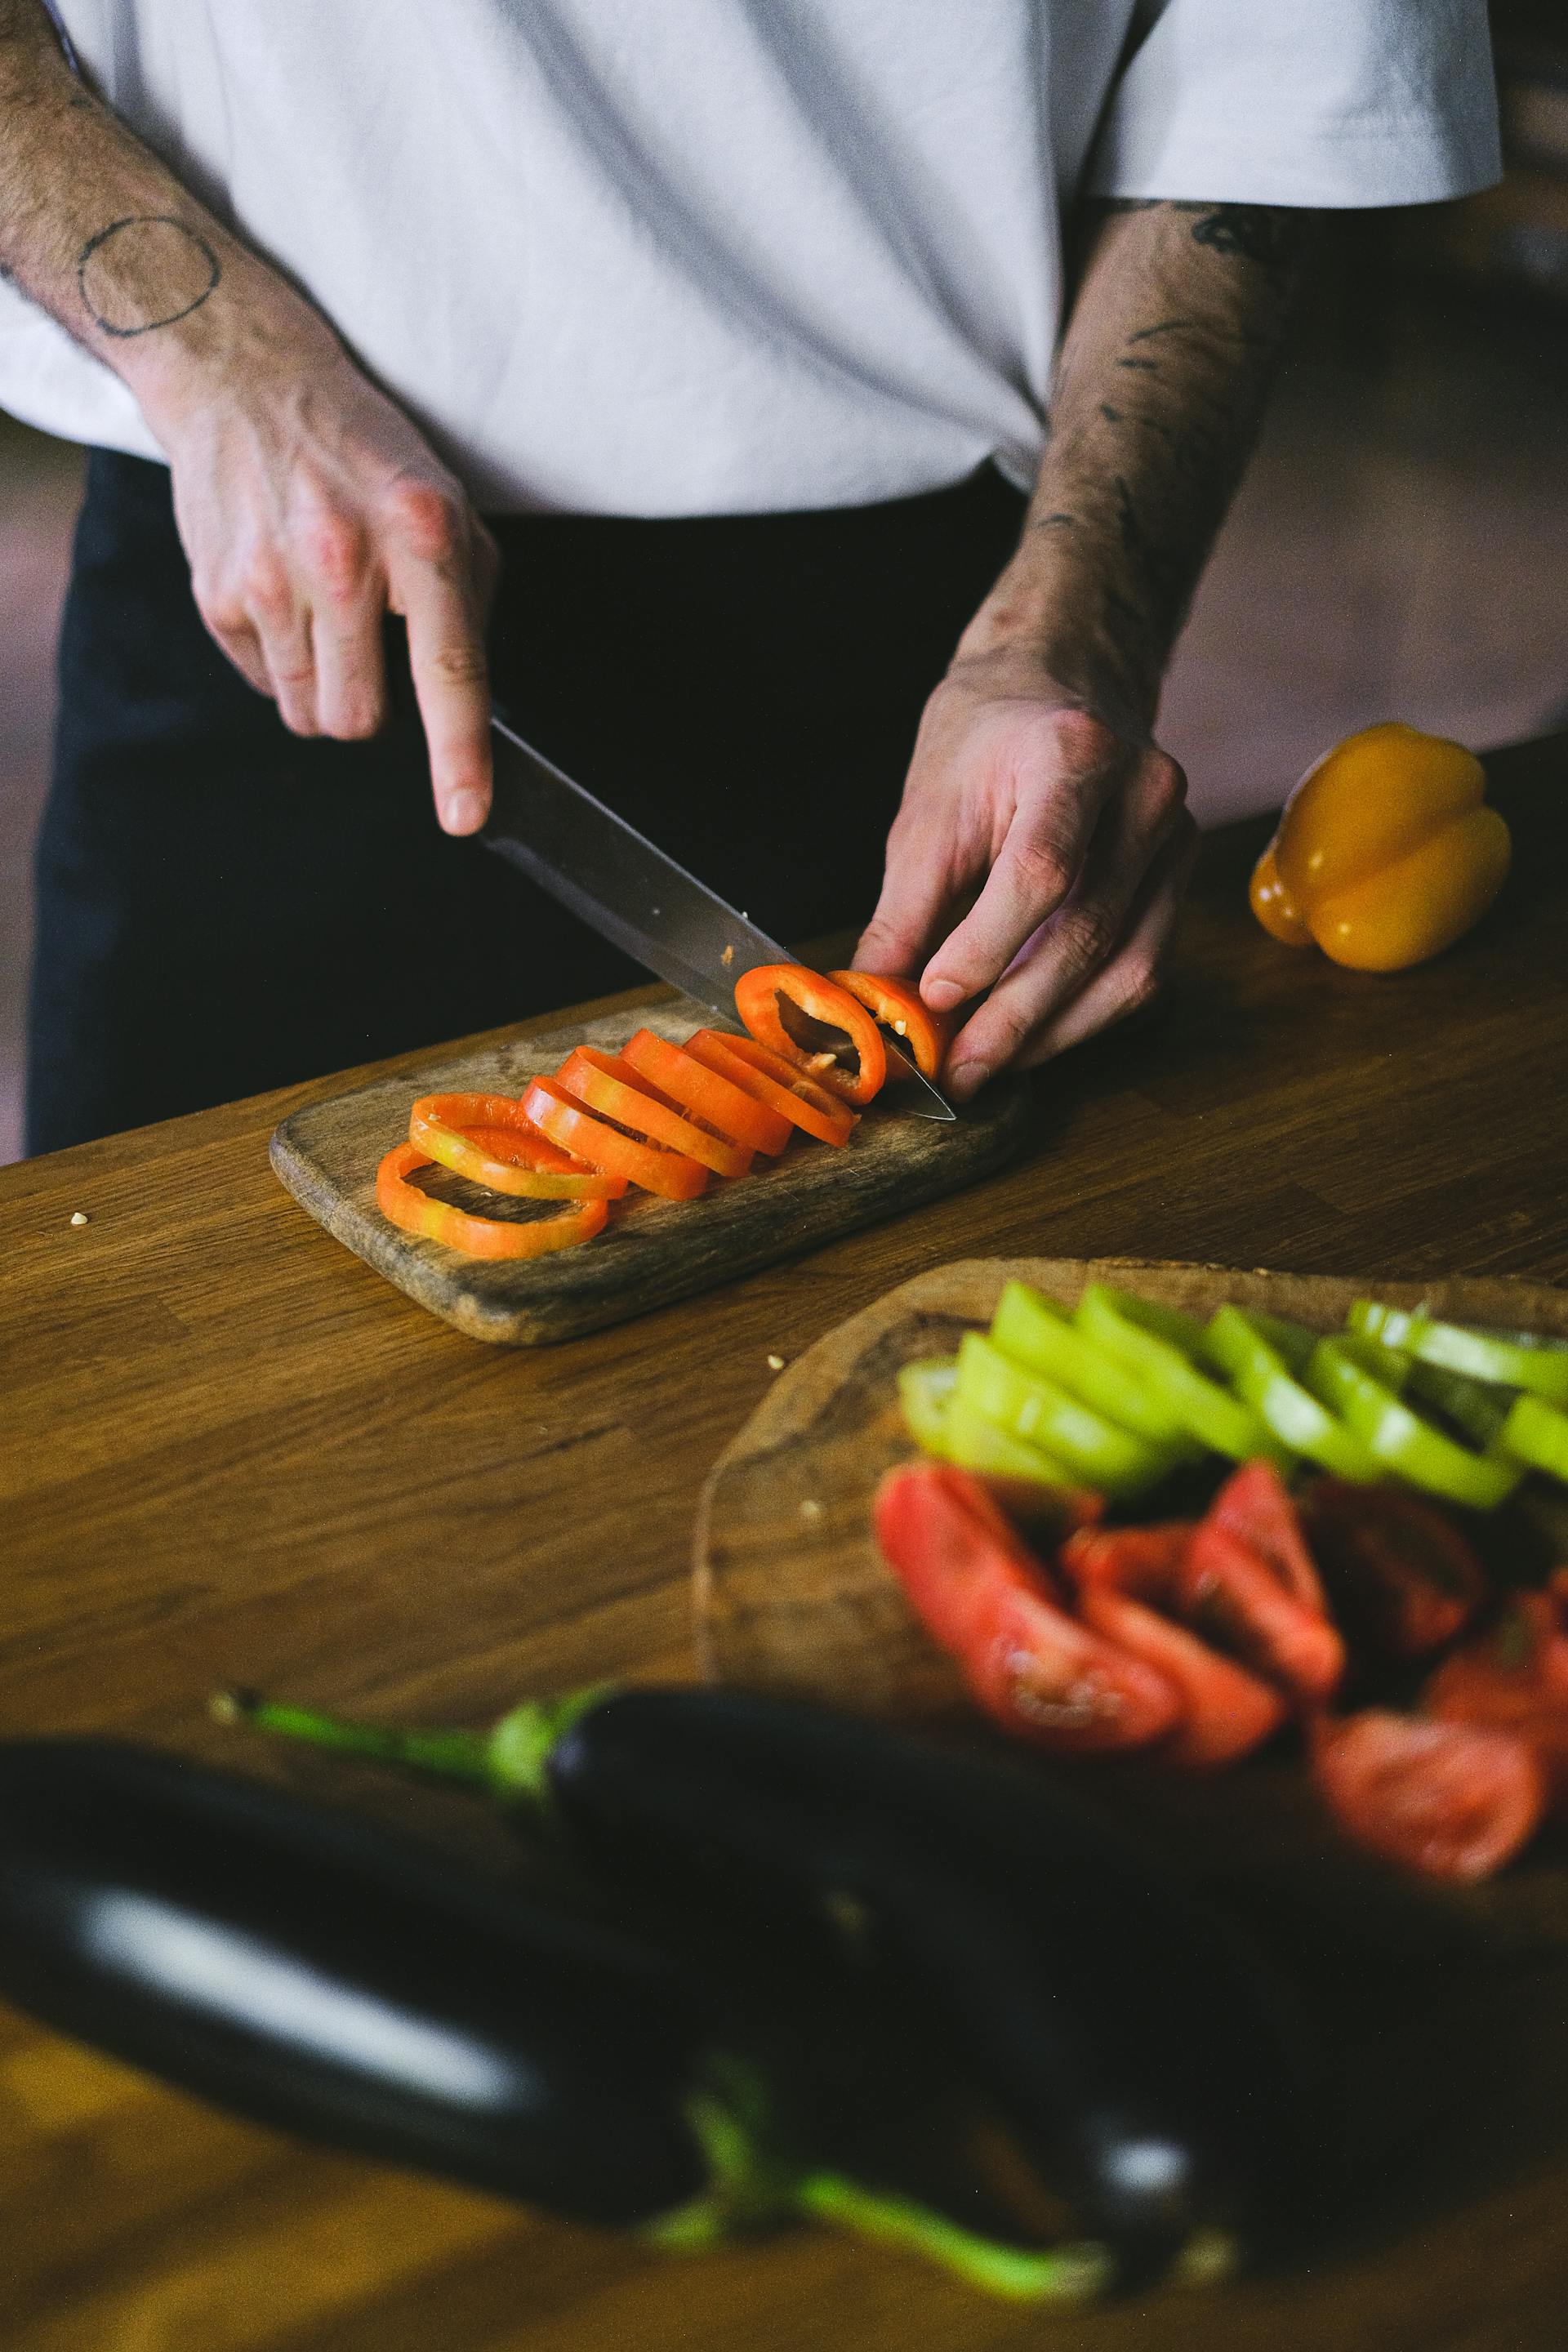 A man chopping vegetables | Source: Pexels